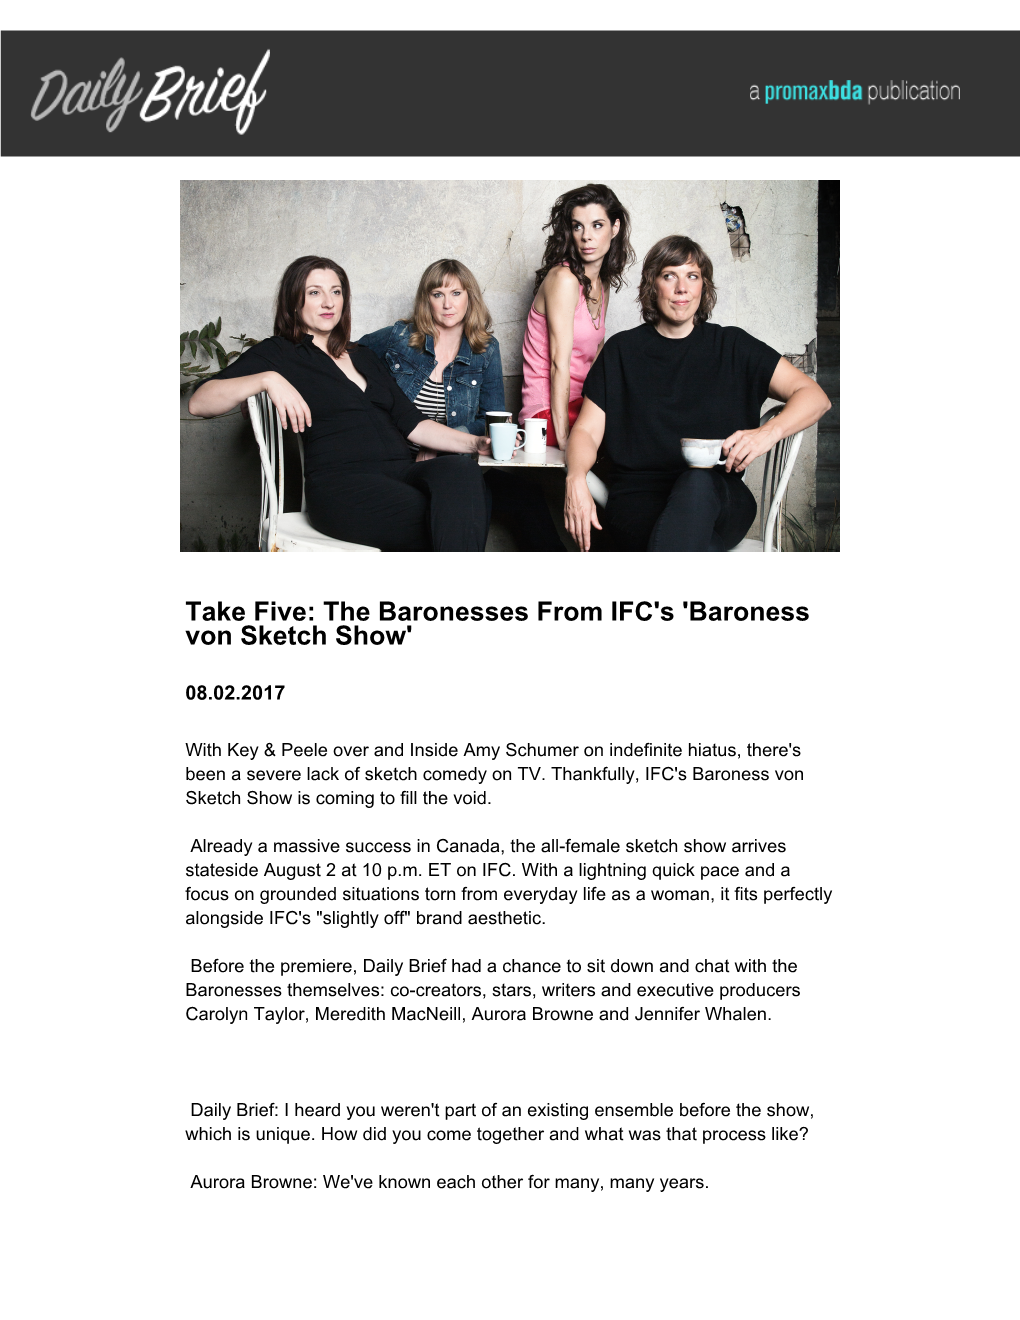 The Baronesses from IFC's 'Baroness Von Sketch Show'